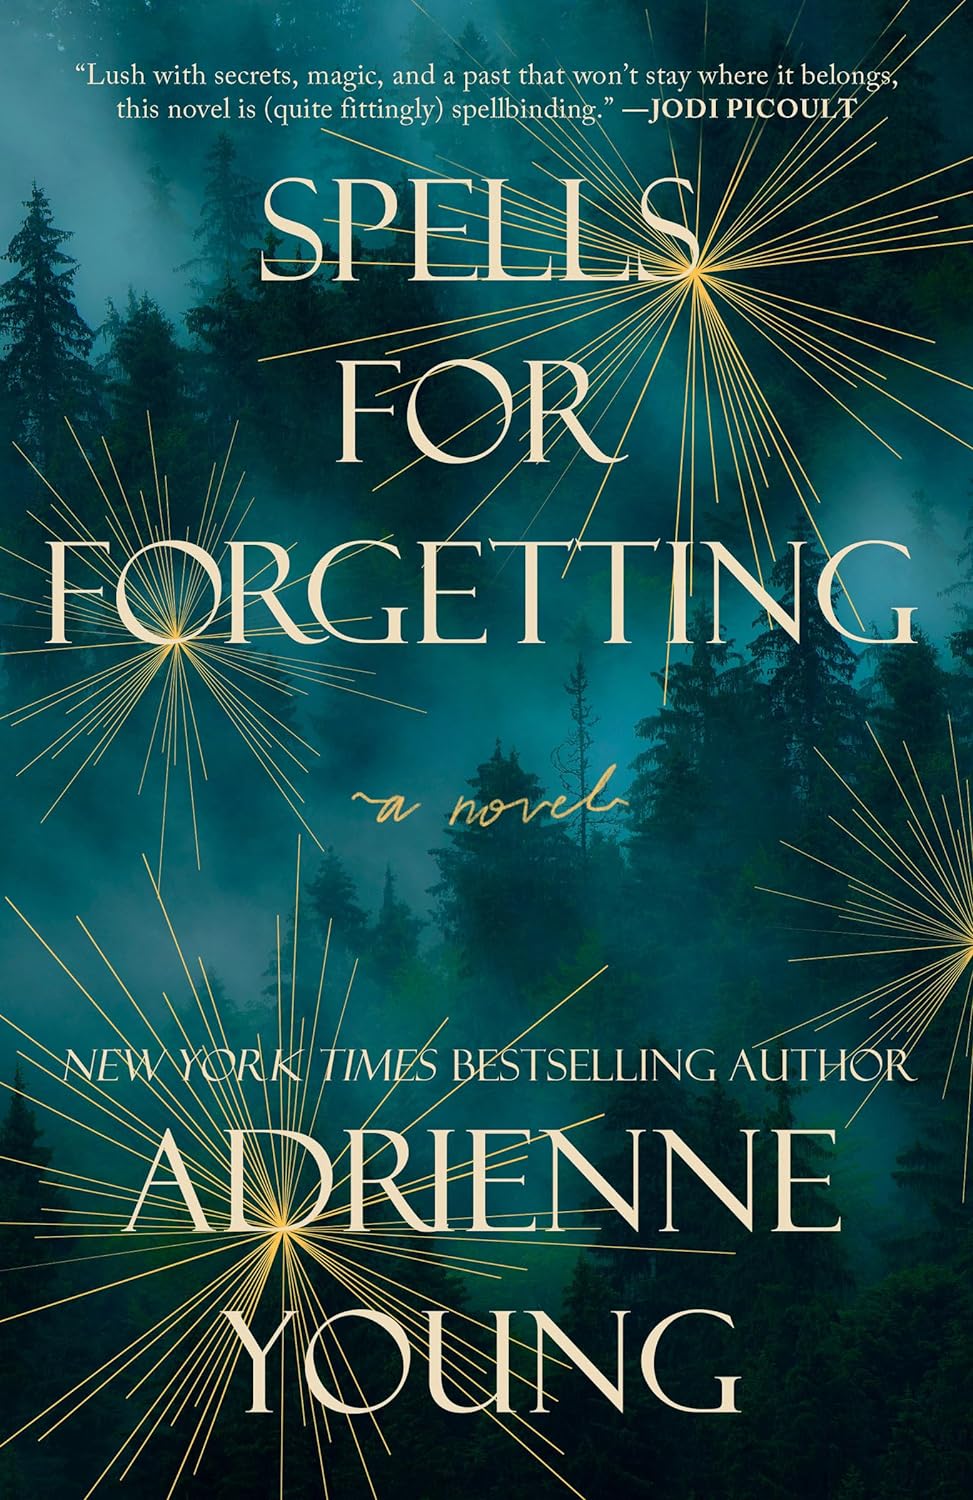 Spells for Forgetting - by Adrienne Young